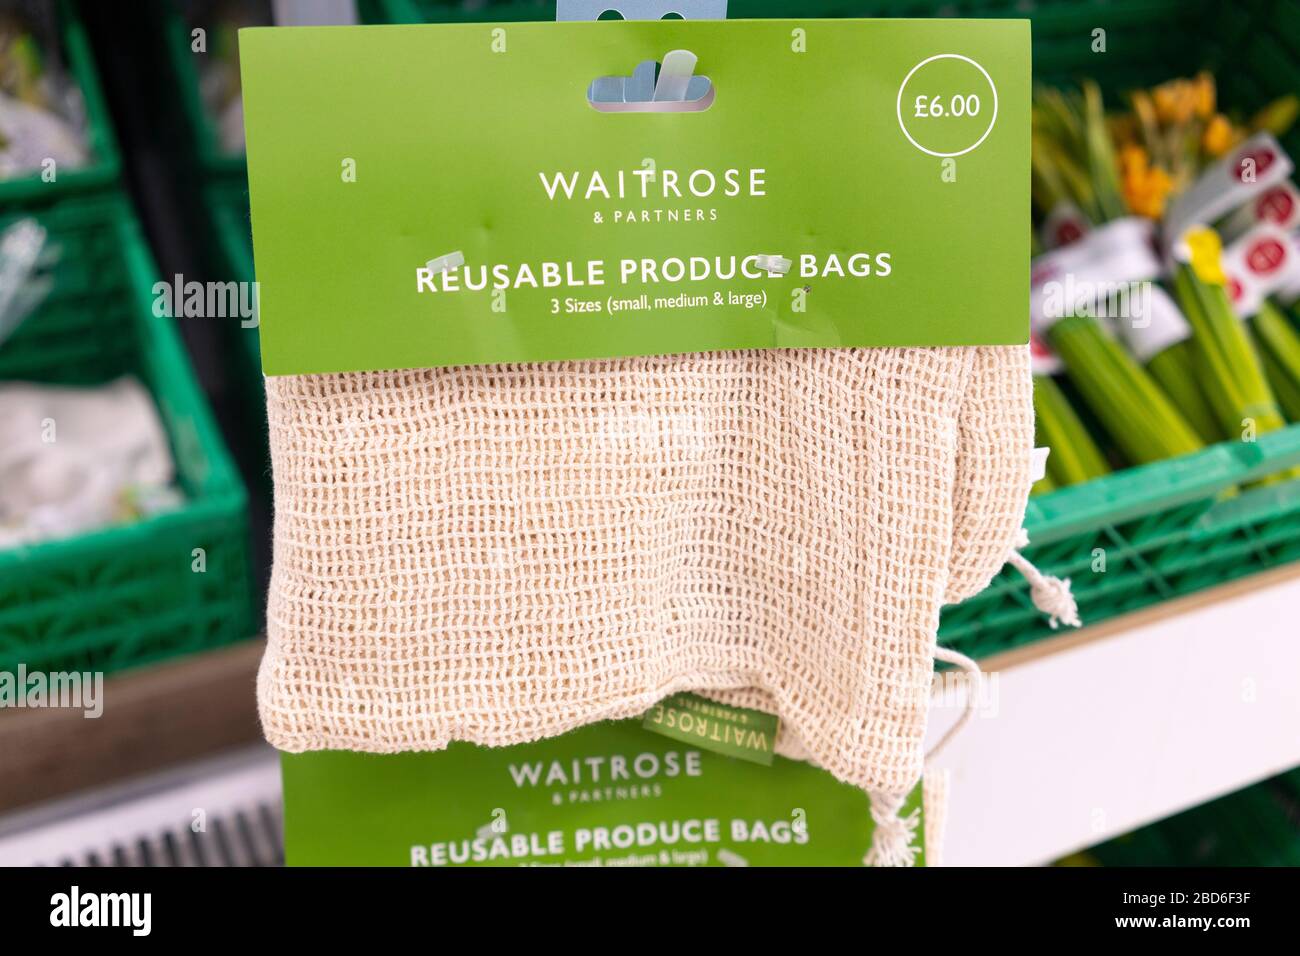 Reusable produce bags at Waitrose supermarket that are ecologically friendly and reduce plastic waste, UK Stock Photo